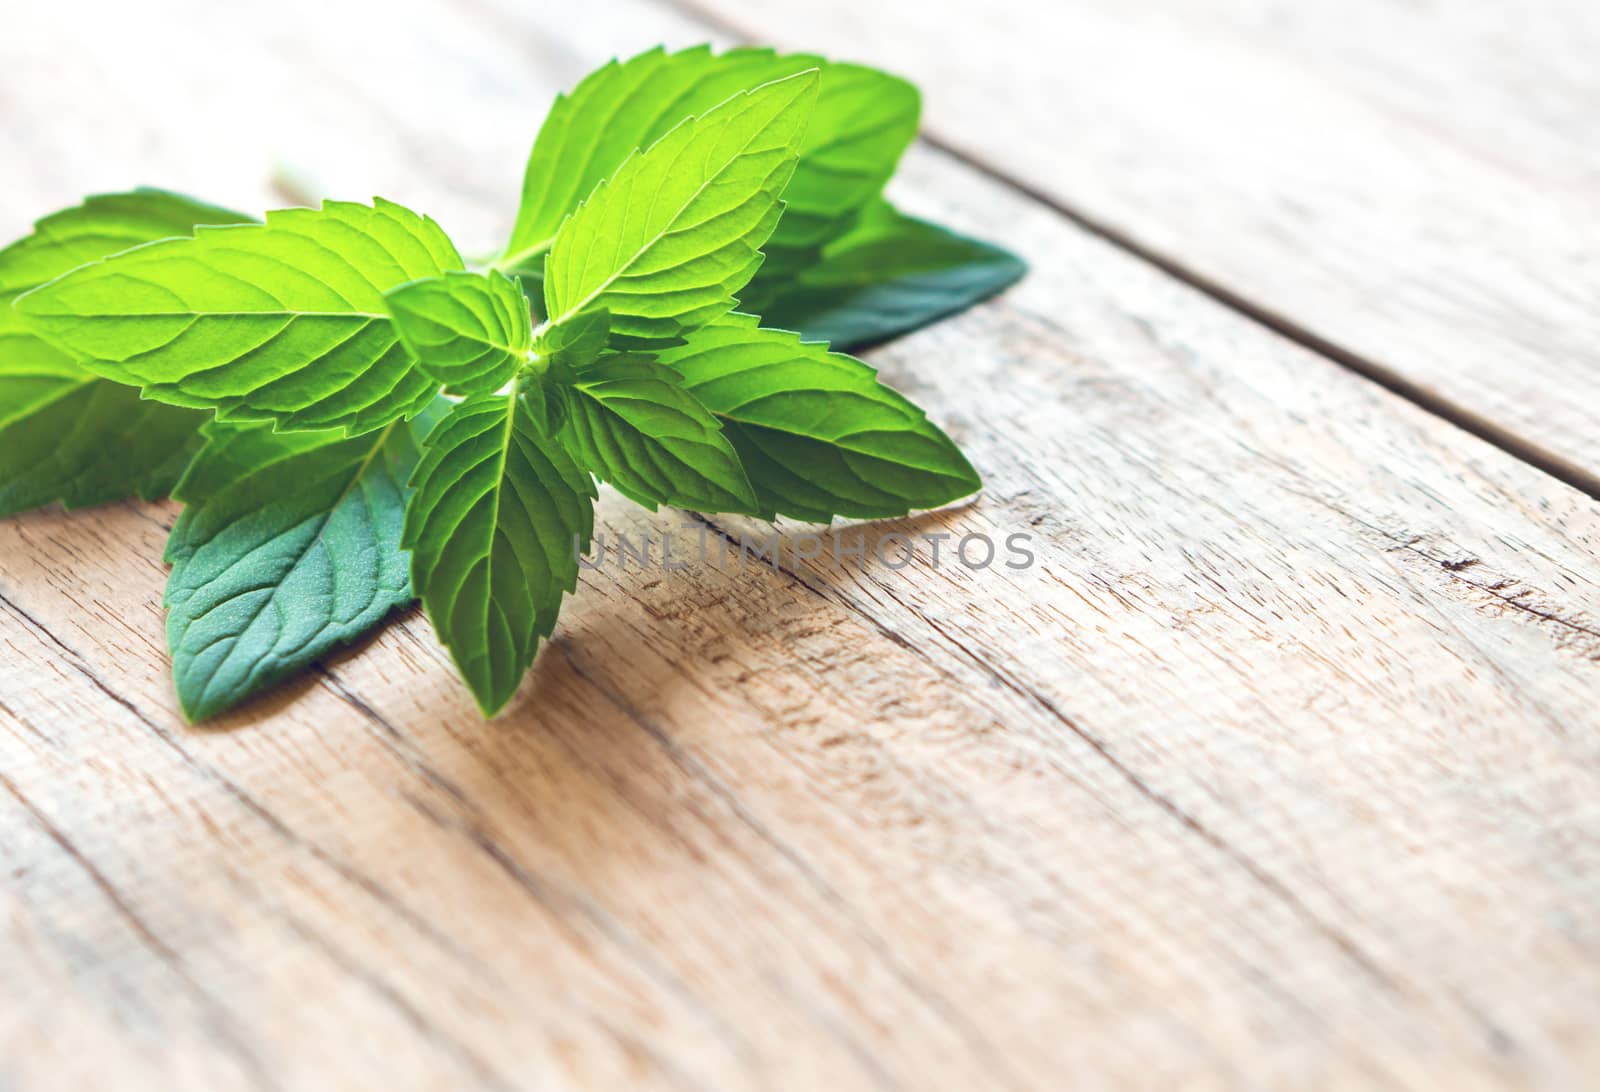 Closeup fresh mint on wood table background, herb and medical concept, selective focus